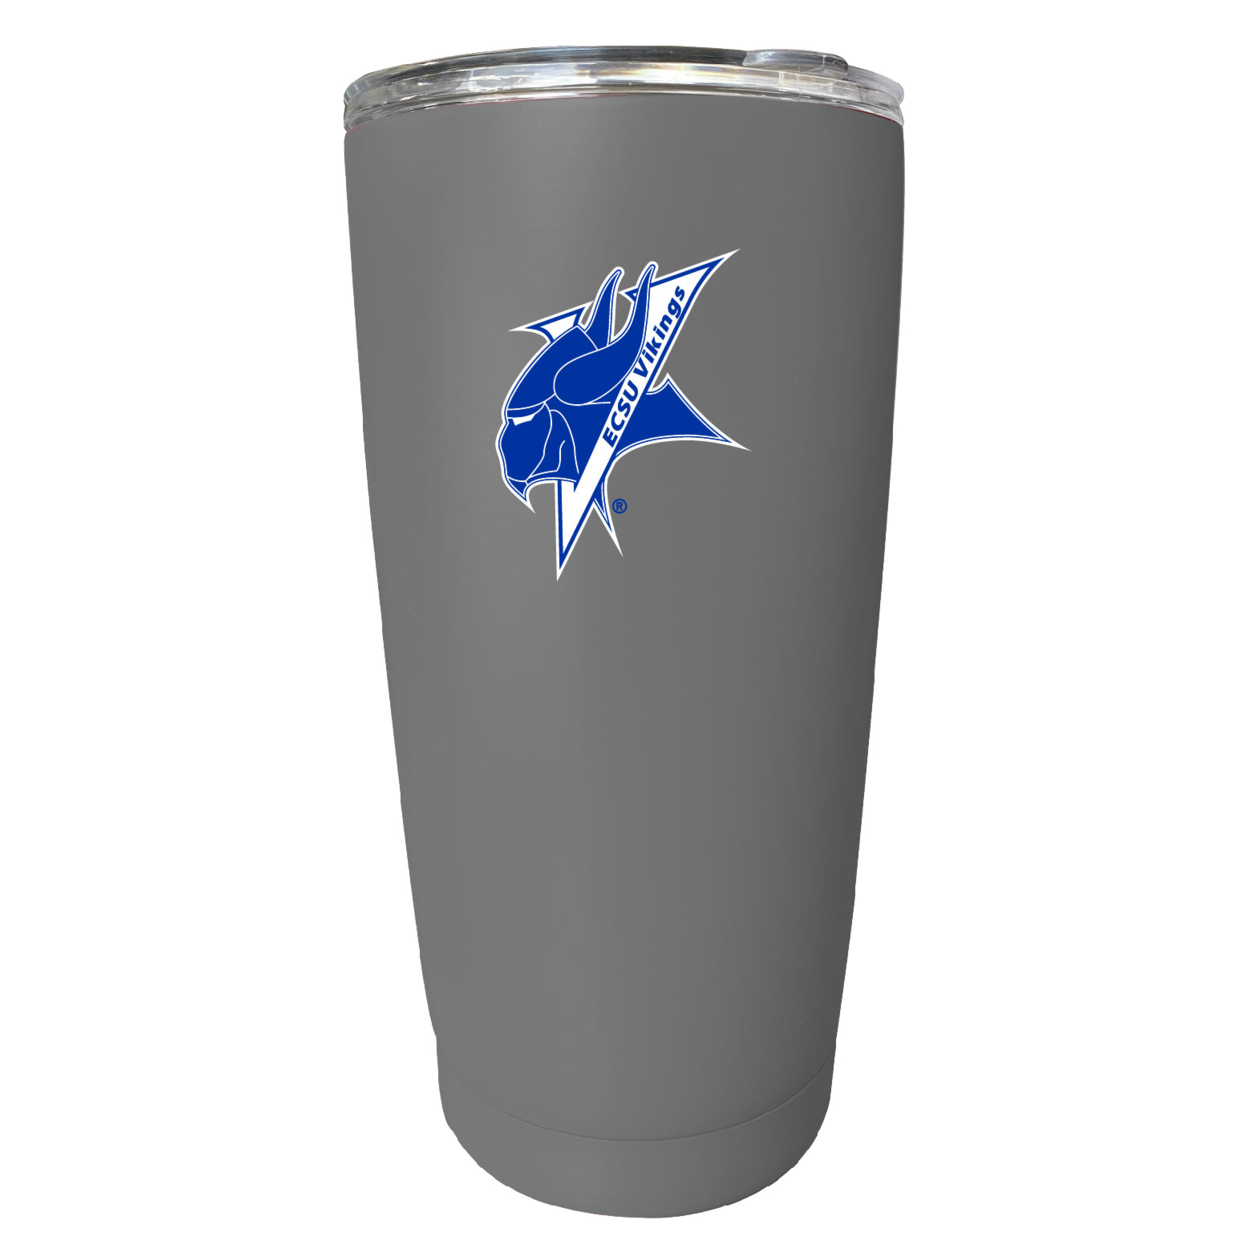 Elizabeth City State University 16 Oz Stainless Steel Insulated Tumbler - Gray